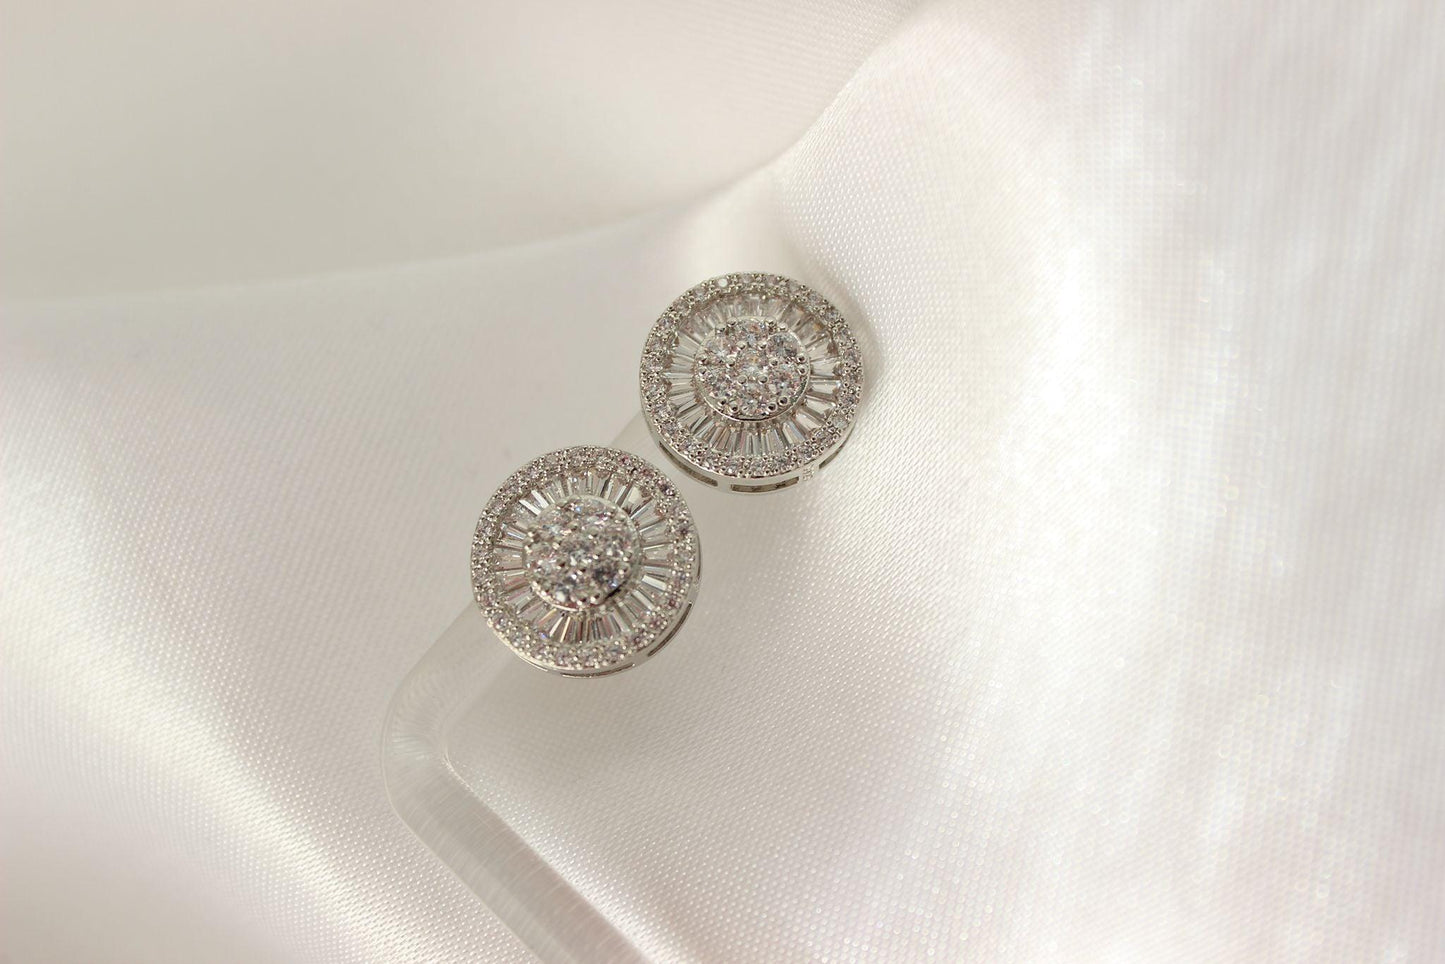 Amore Collective bridal wedding accessories earrings cubic zirconia